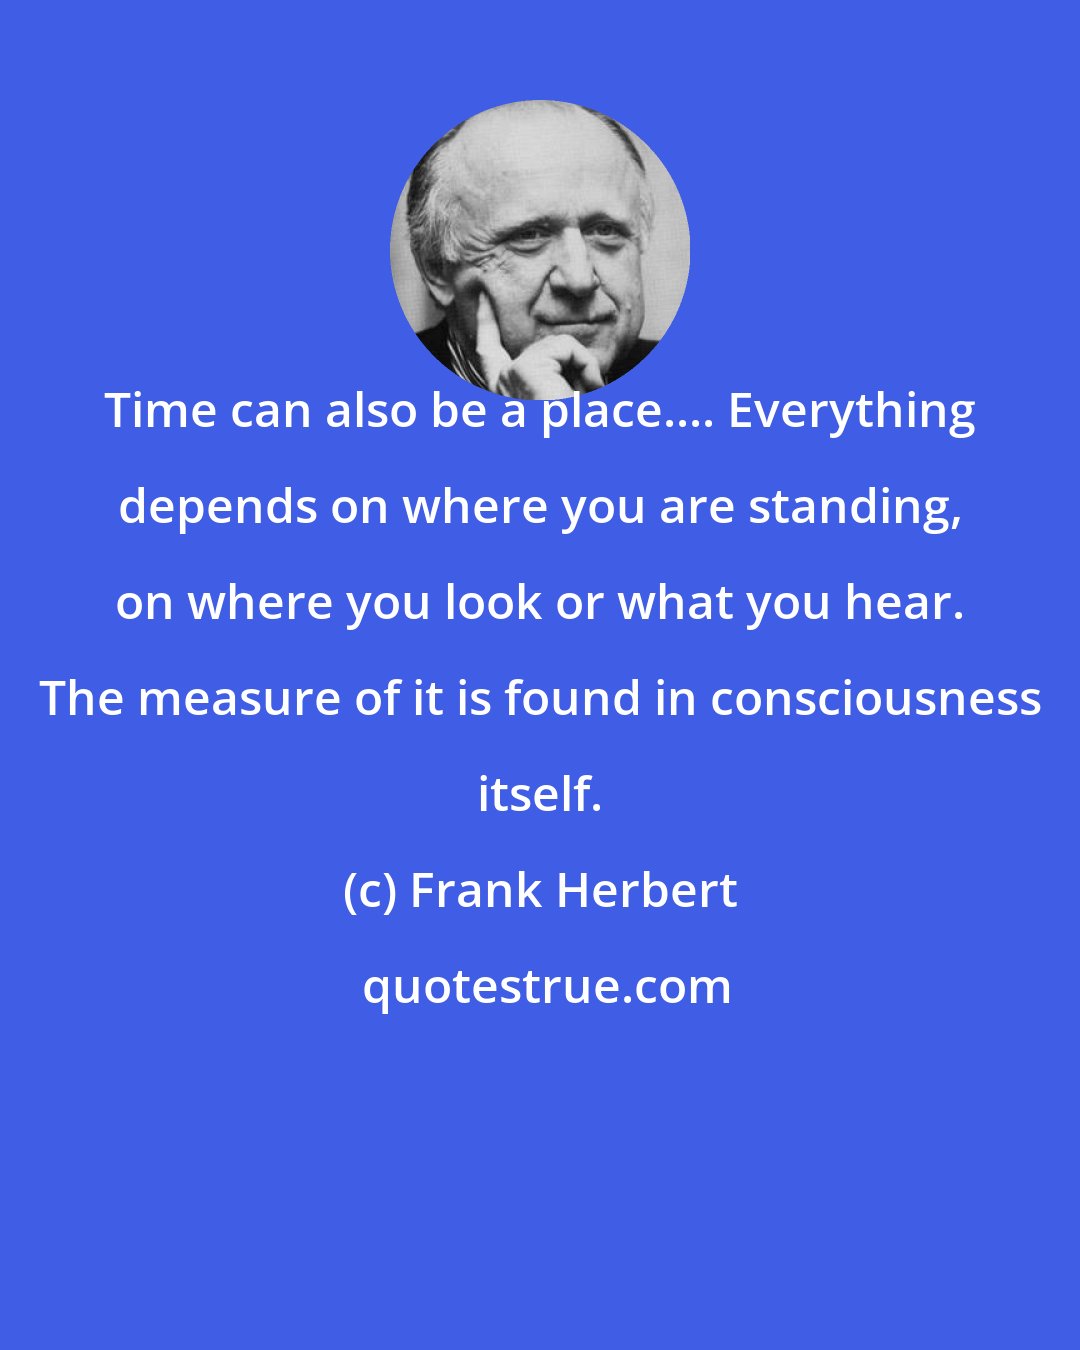 Frank Herbert: Time can also be a place.... Everything depends on where you are standing, on where you look or what you hear. The measure of it is found in consciousness itself.